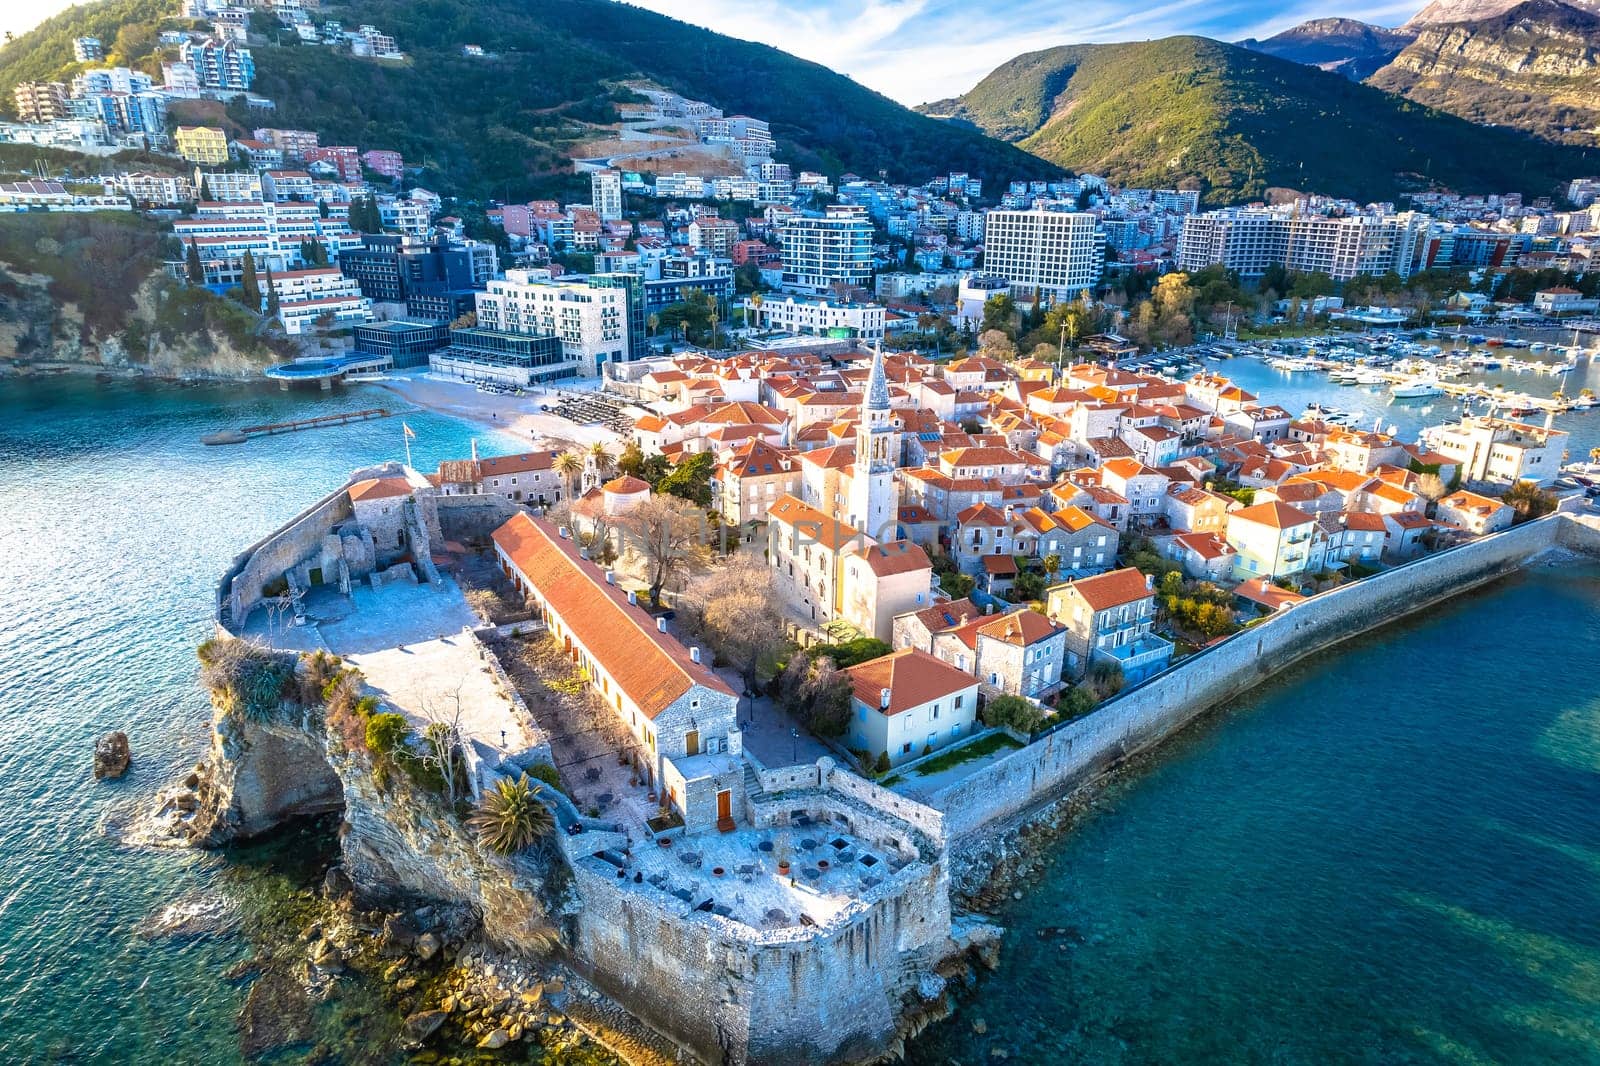 Town of Budva historic architecture aerial view by xbrchx